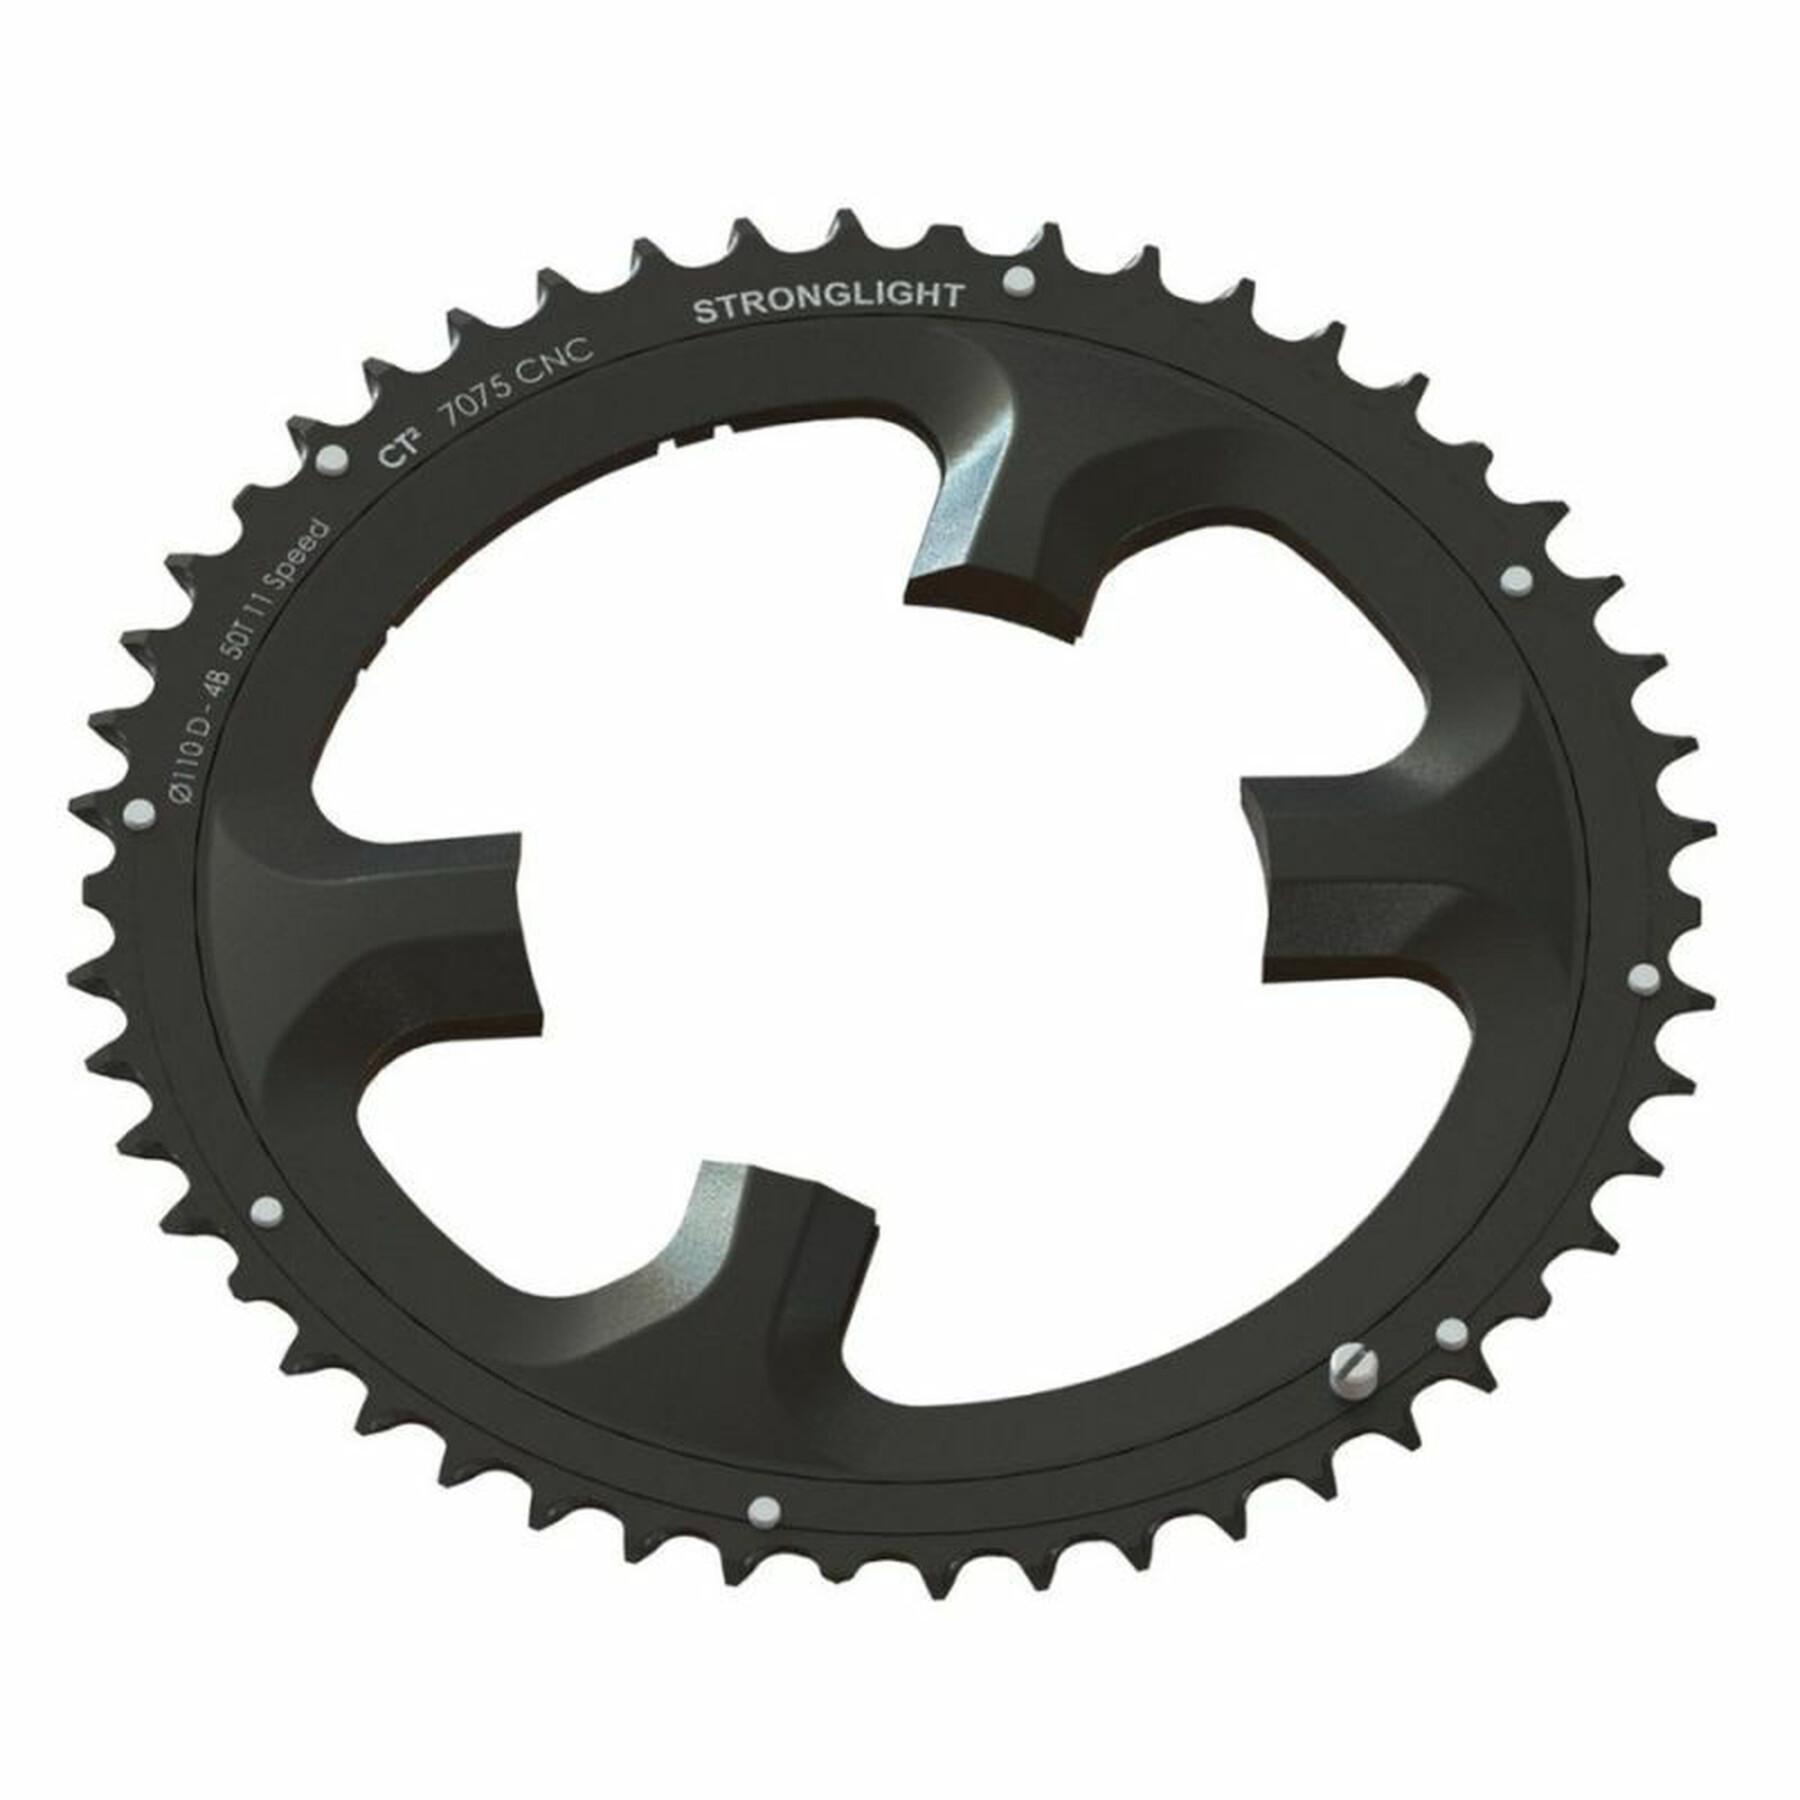 Plateau externe Stronglight Shimano Dura Ace FC-9000/DI2 11V 50T